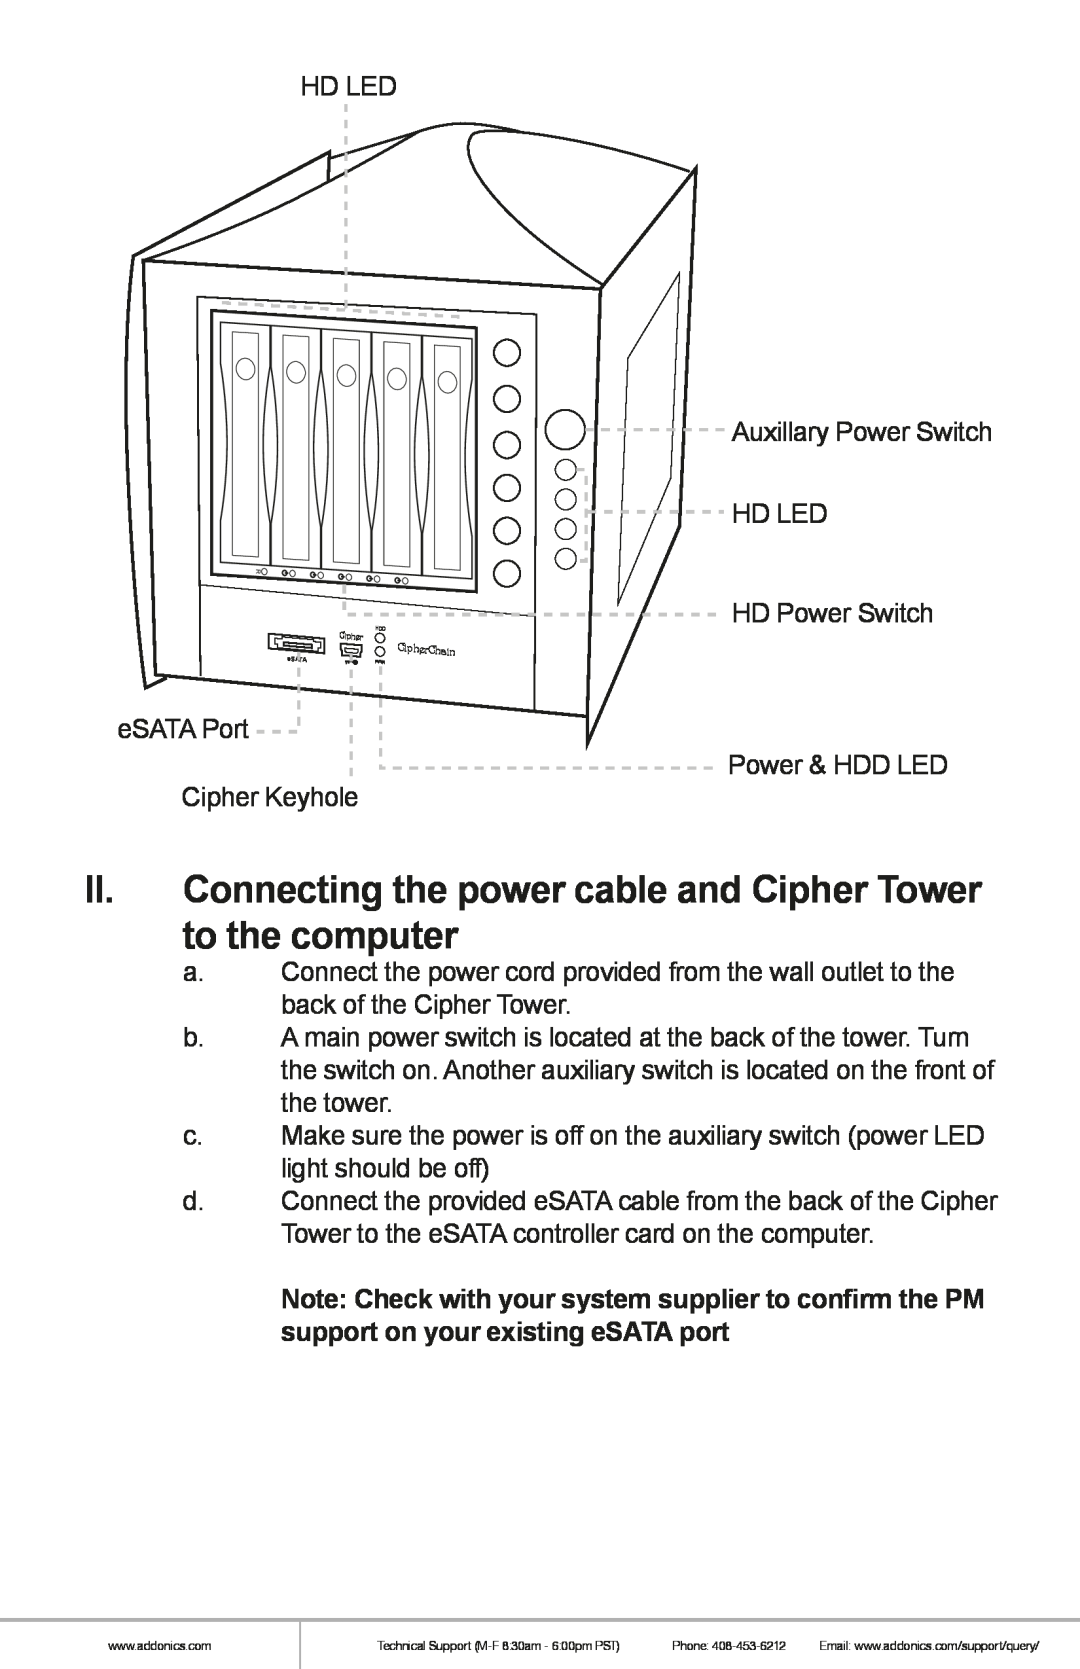 Addonics Technologies CRT535PES manual II. Connecting the power cable and Cipher Tower to the computer 